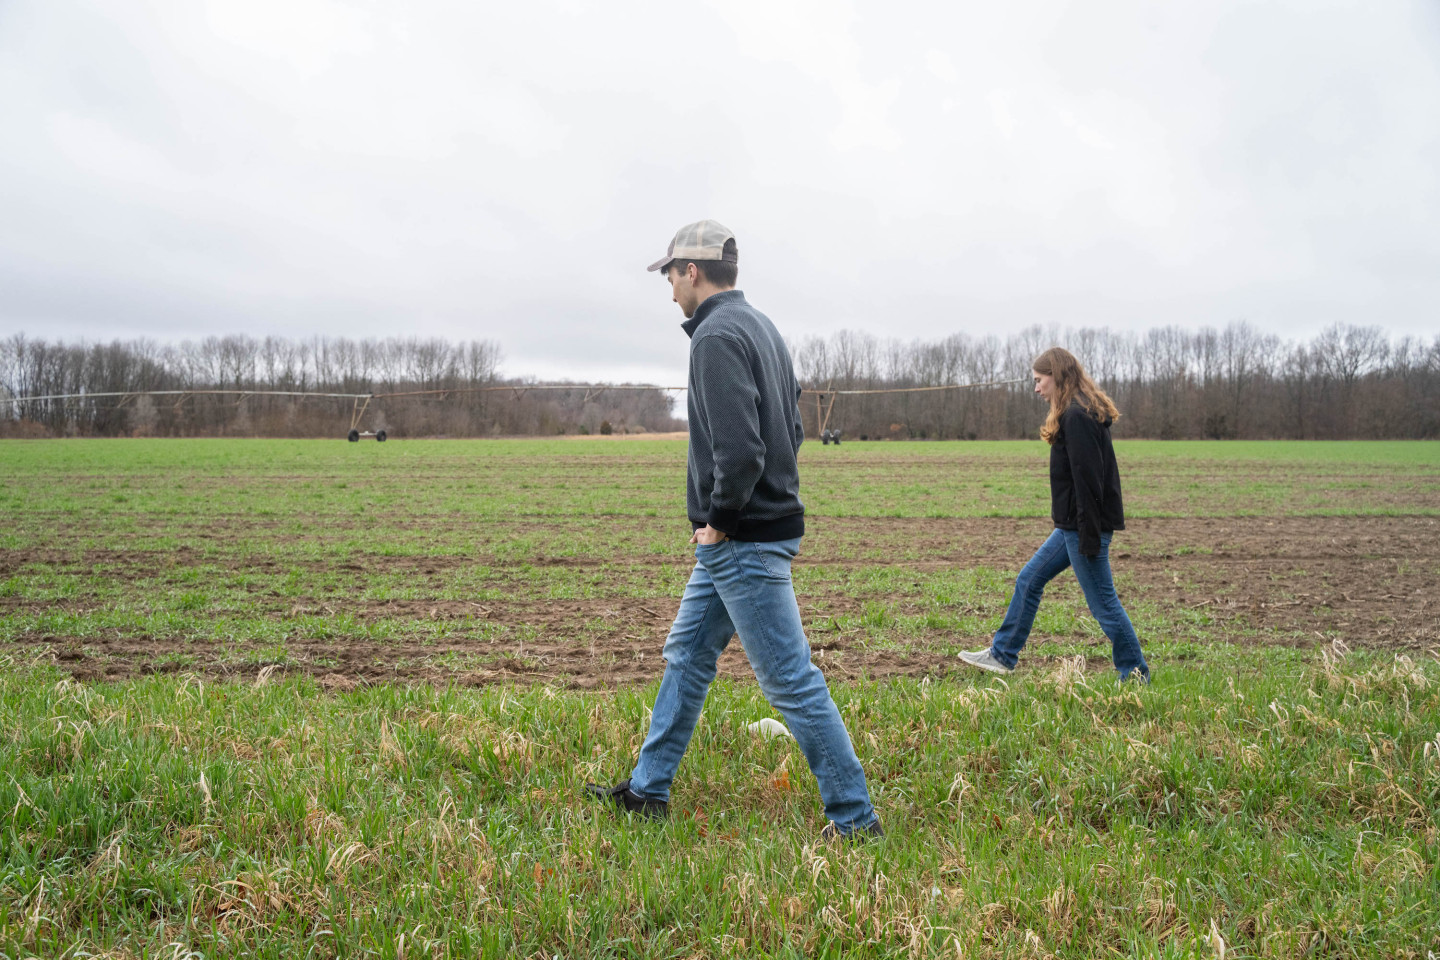 Two people walk through a field.